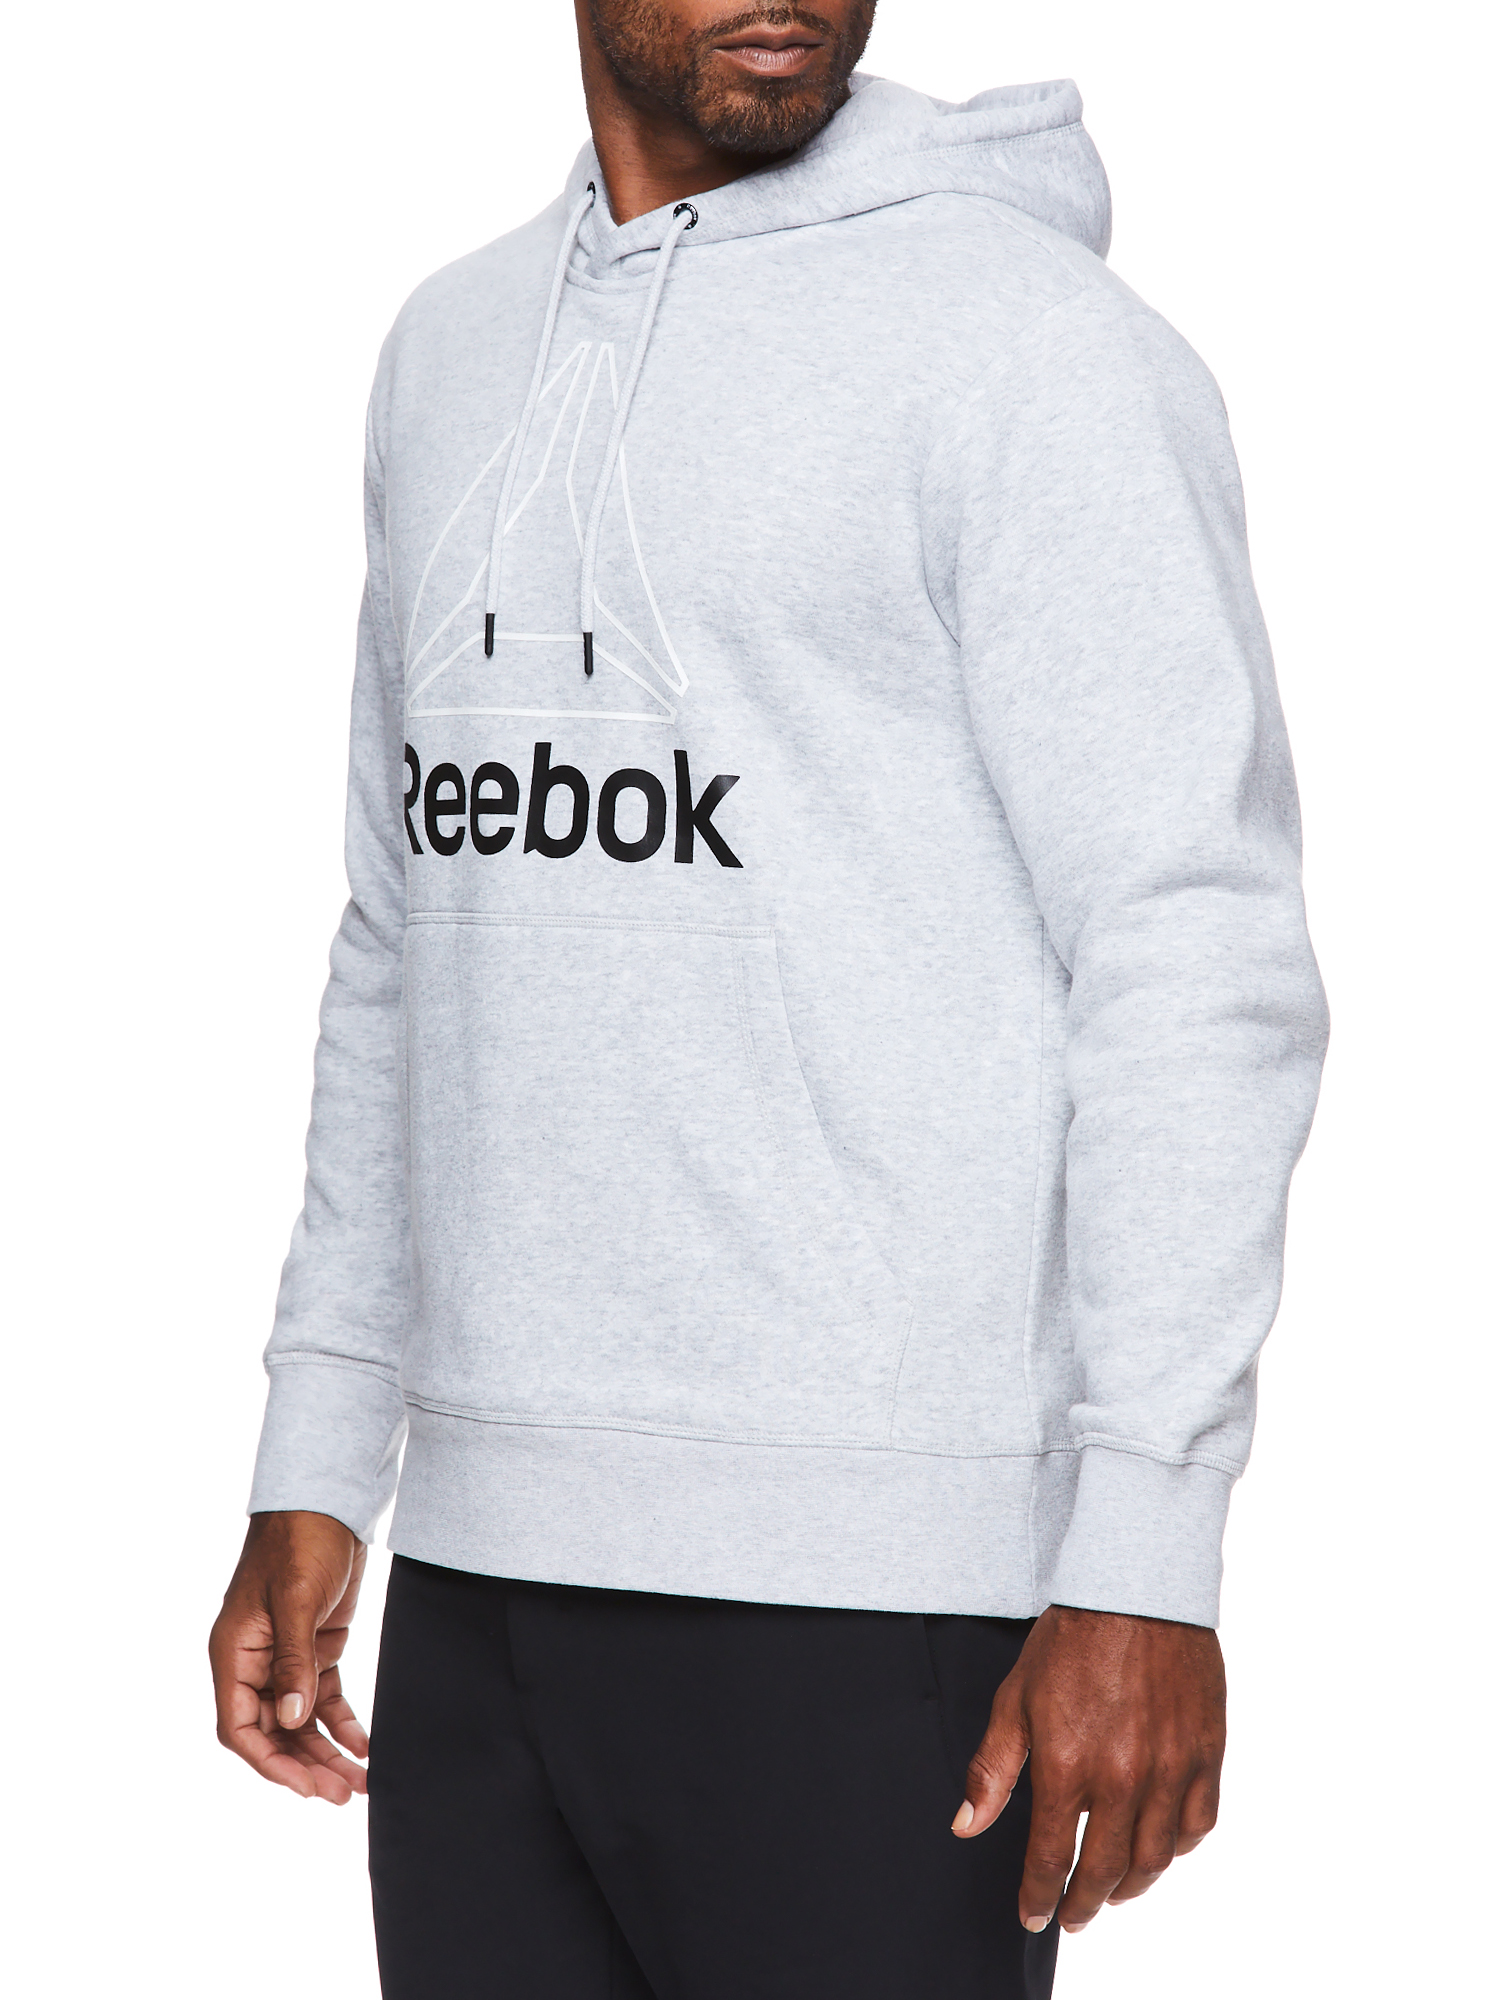 Reebok Mens and Big Mens Active Pullover Fleece Hoodie, Up to 3XL - image 2 of 5